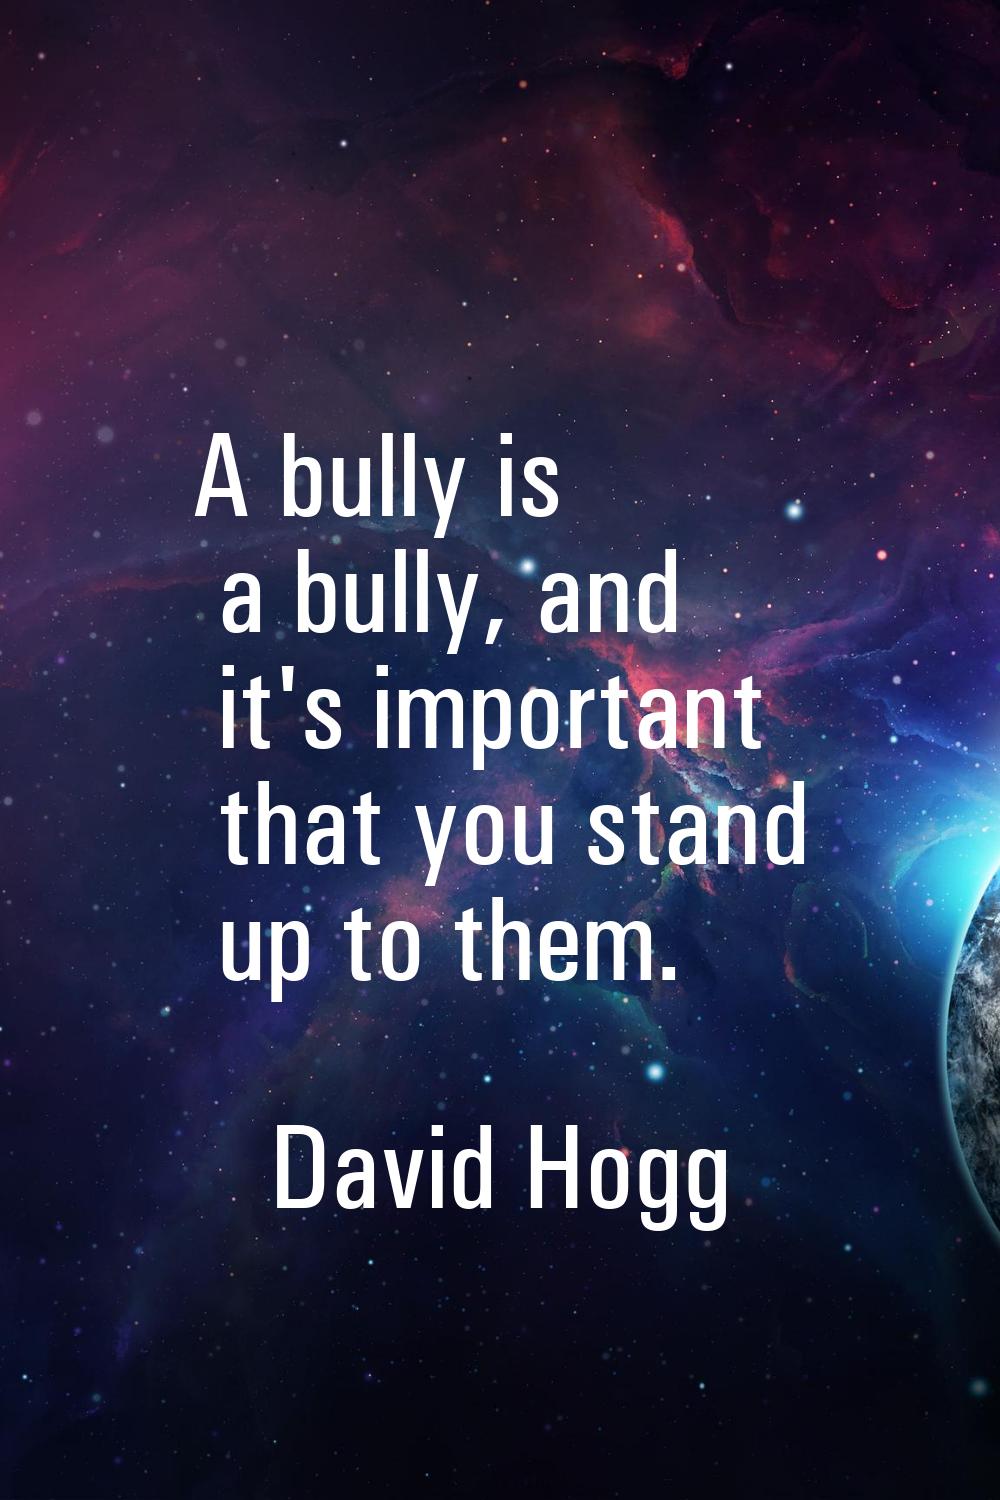 A bully is a bully, and it's important that you stand up to them.